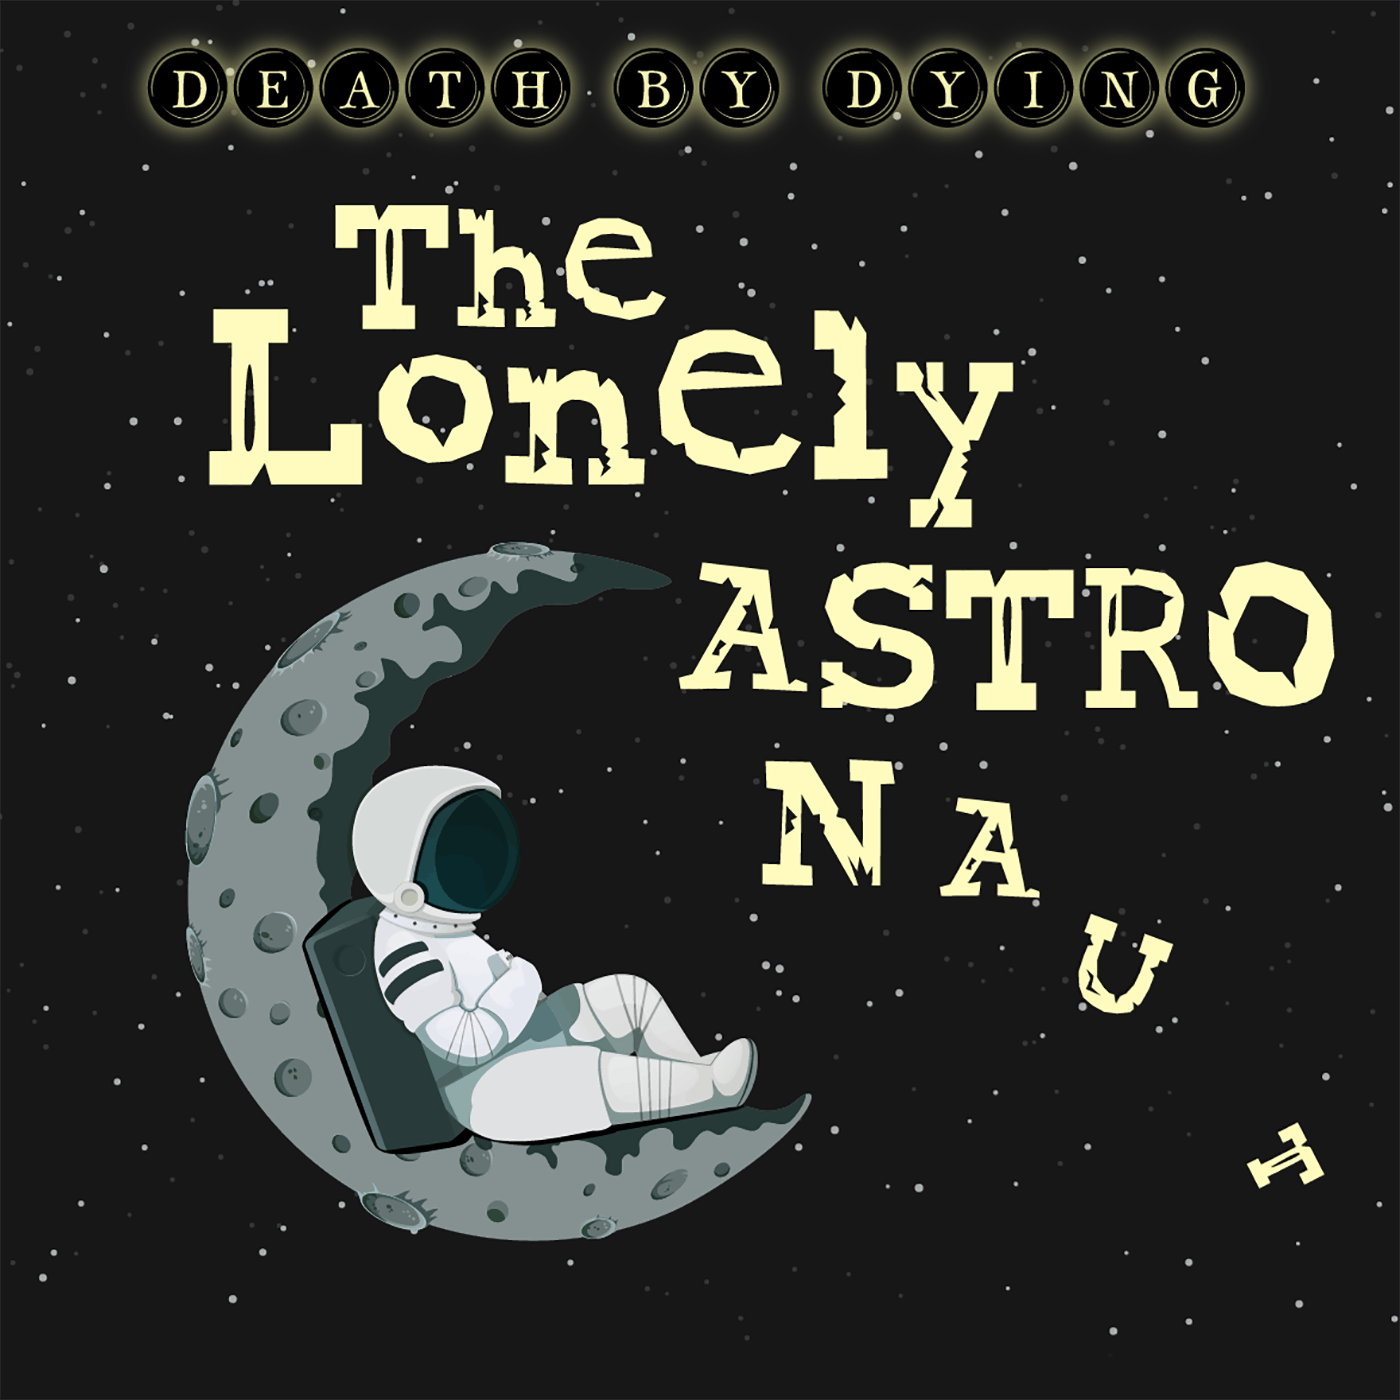 The Lonely Astronaut: A Death by Dying Children’s Story